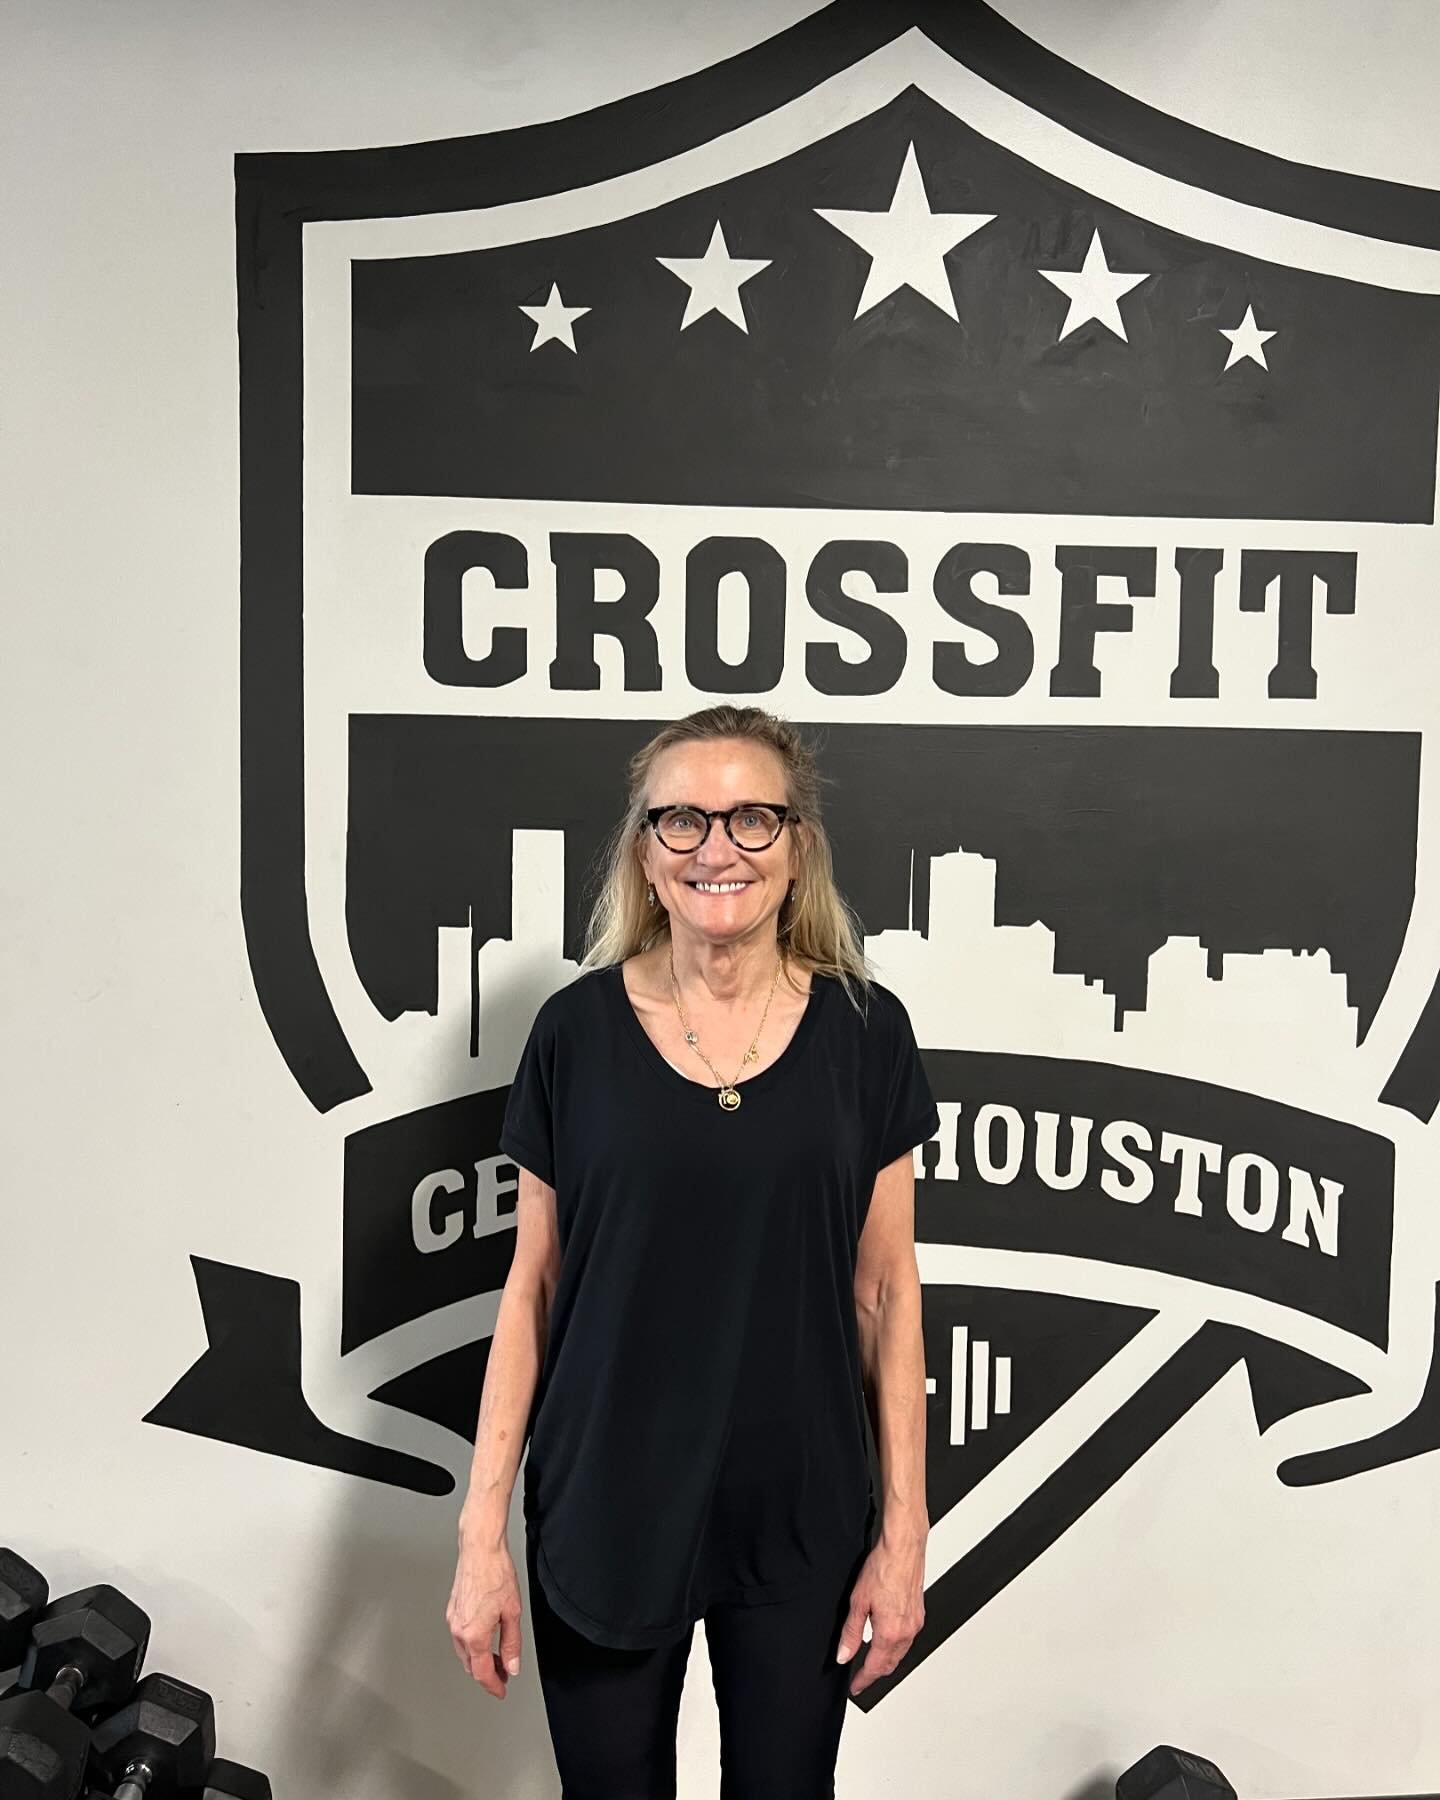 💥New OnRamp Grad💥

Meet Lynn! She recently finished OnRamp. If you see her in your class, give her a warm CFCH welcome!

Here at CFCH, we pride ourselves on our community. If you see a new face in class, take the time and initiative to introduce yo